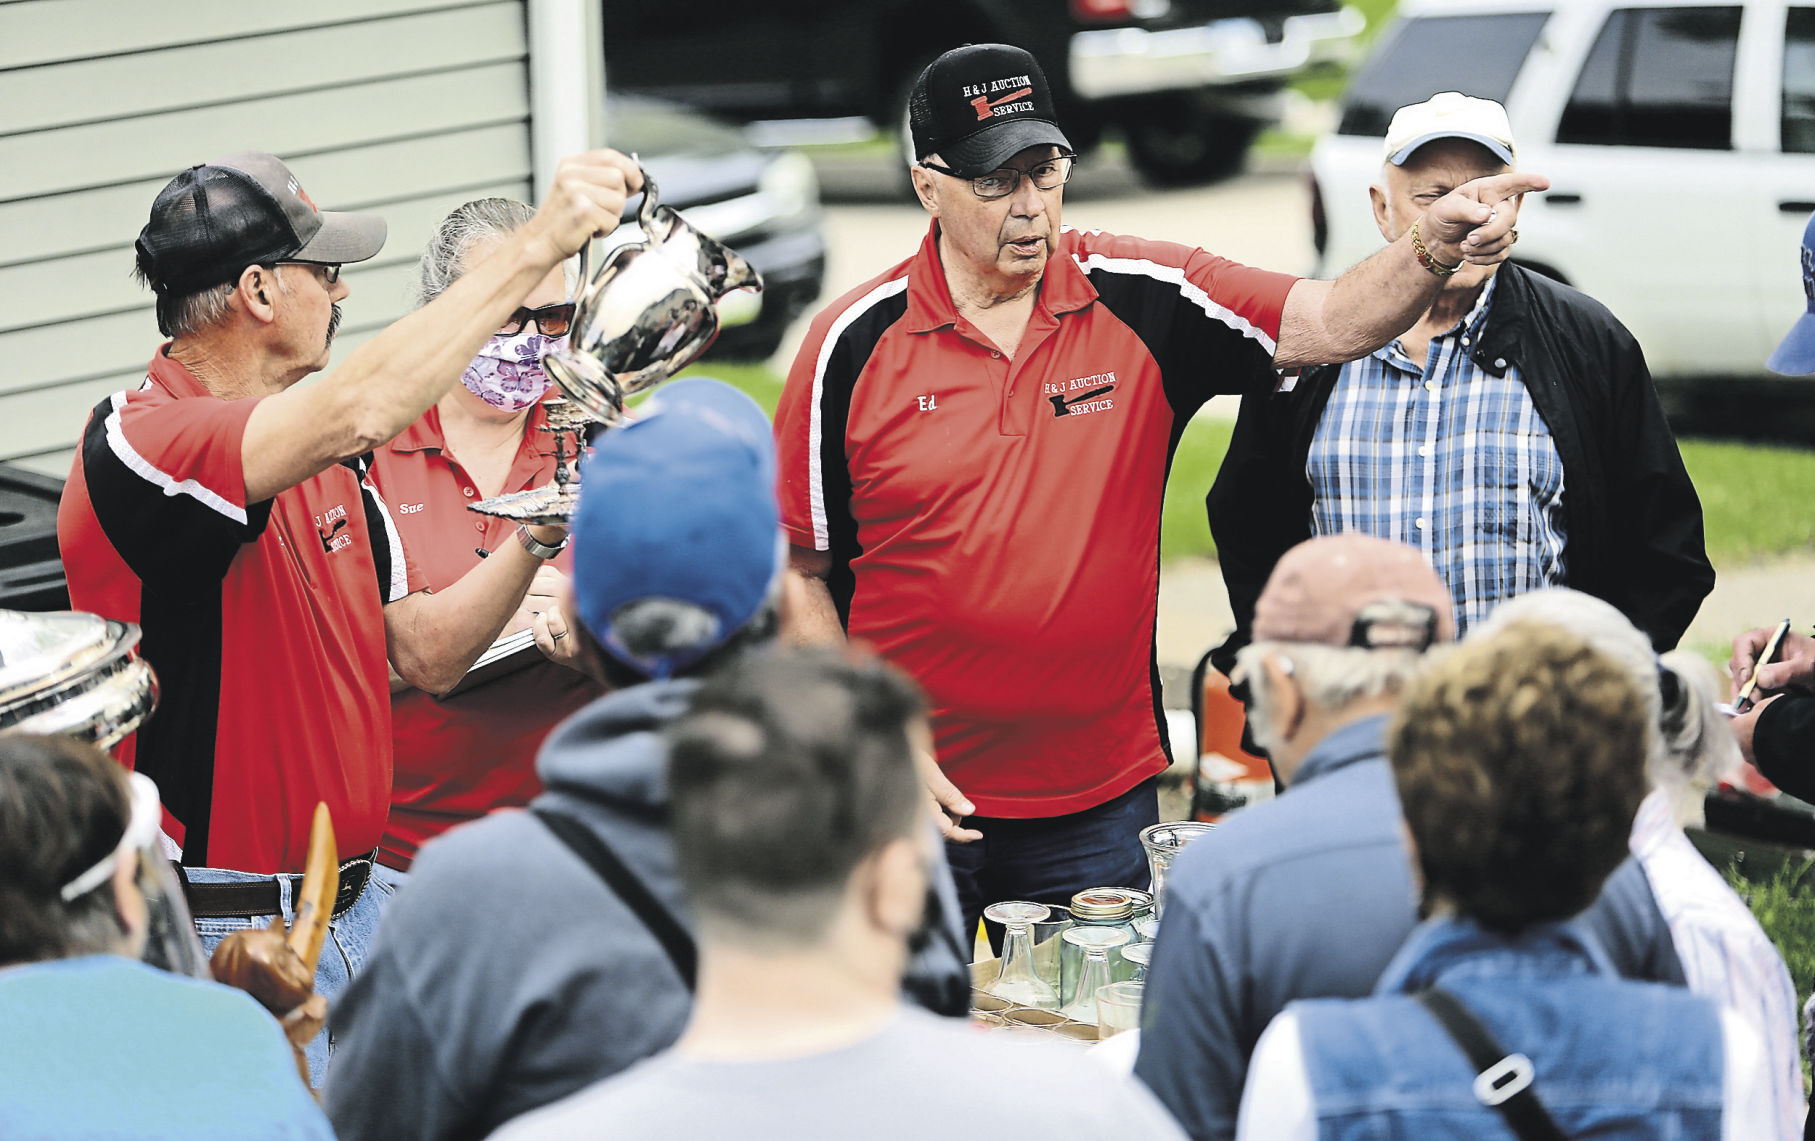 Ed Hess (center), co-owner of H&J Auction Service, points to a customer who made a bid during an estate auction held in Dubuque. The business began in 1992. The owners say that they have sold a little bit of everything through the years. PHOTO CREDIT: Dave Kettering